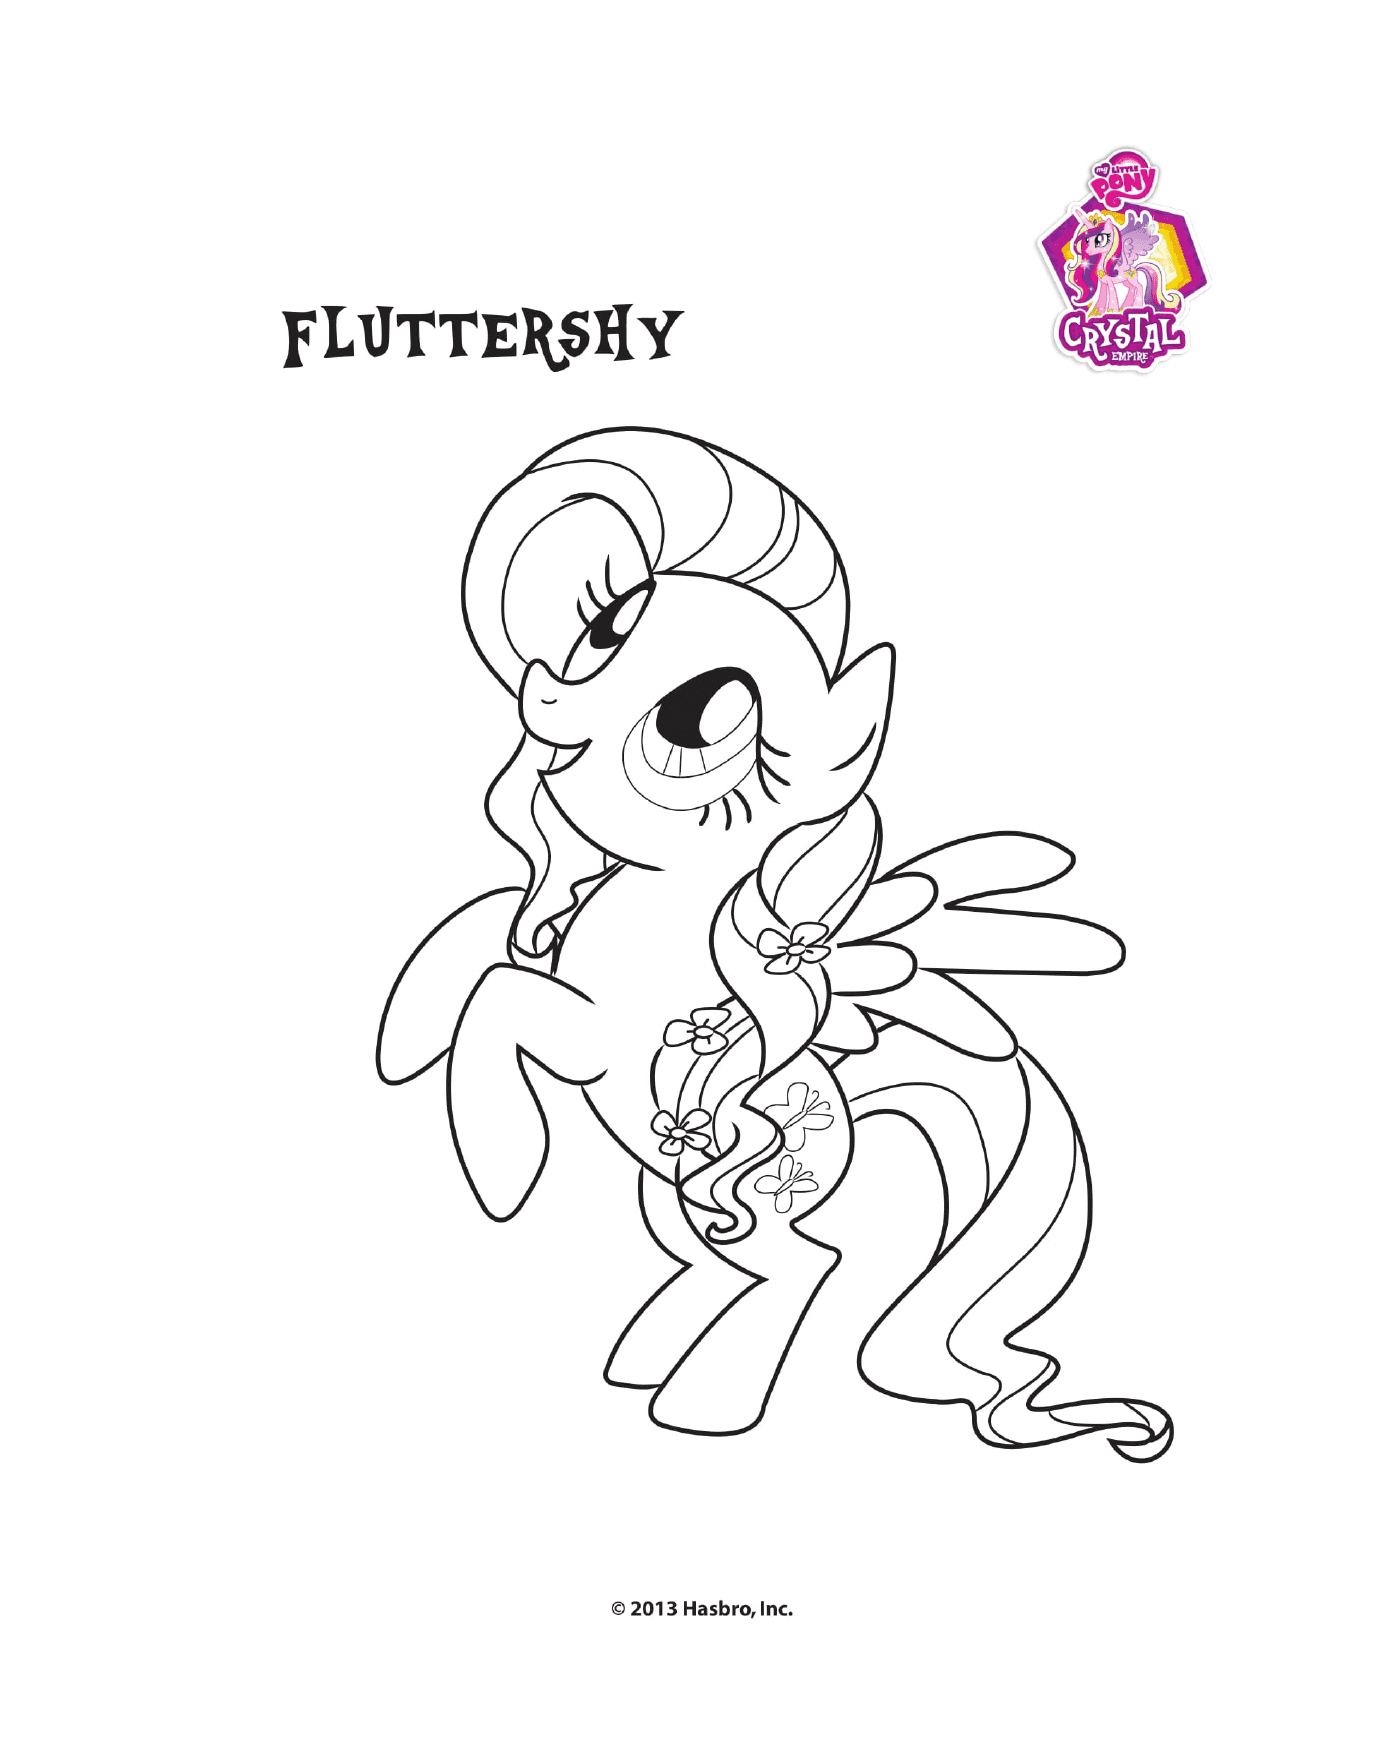  Fluttershy at Crystal Empire 